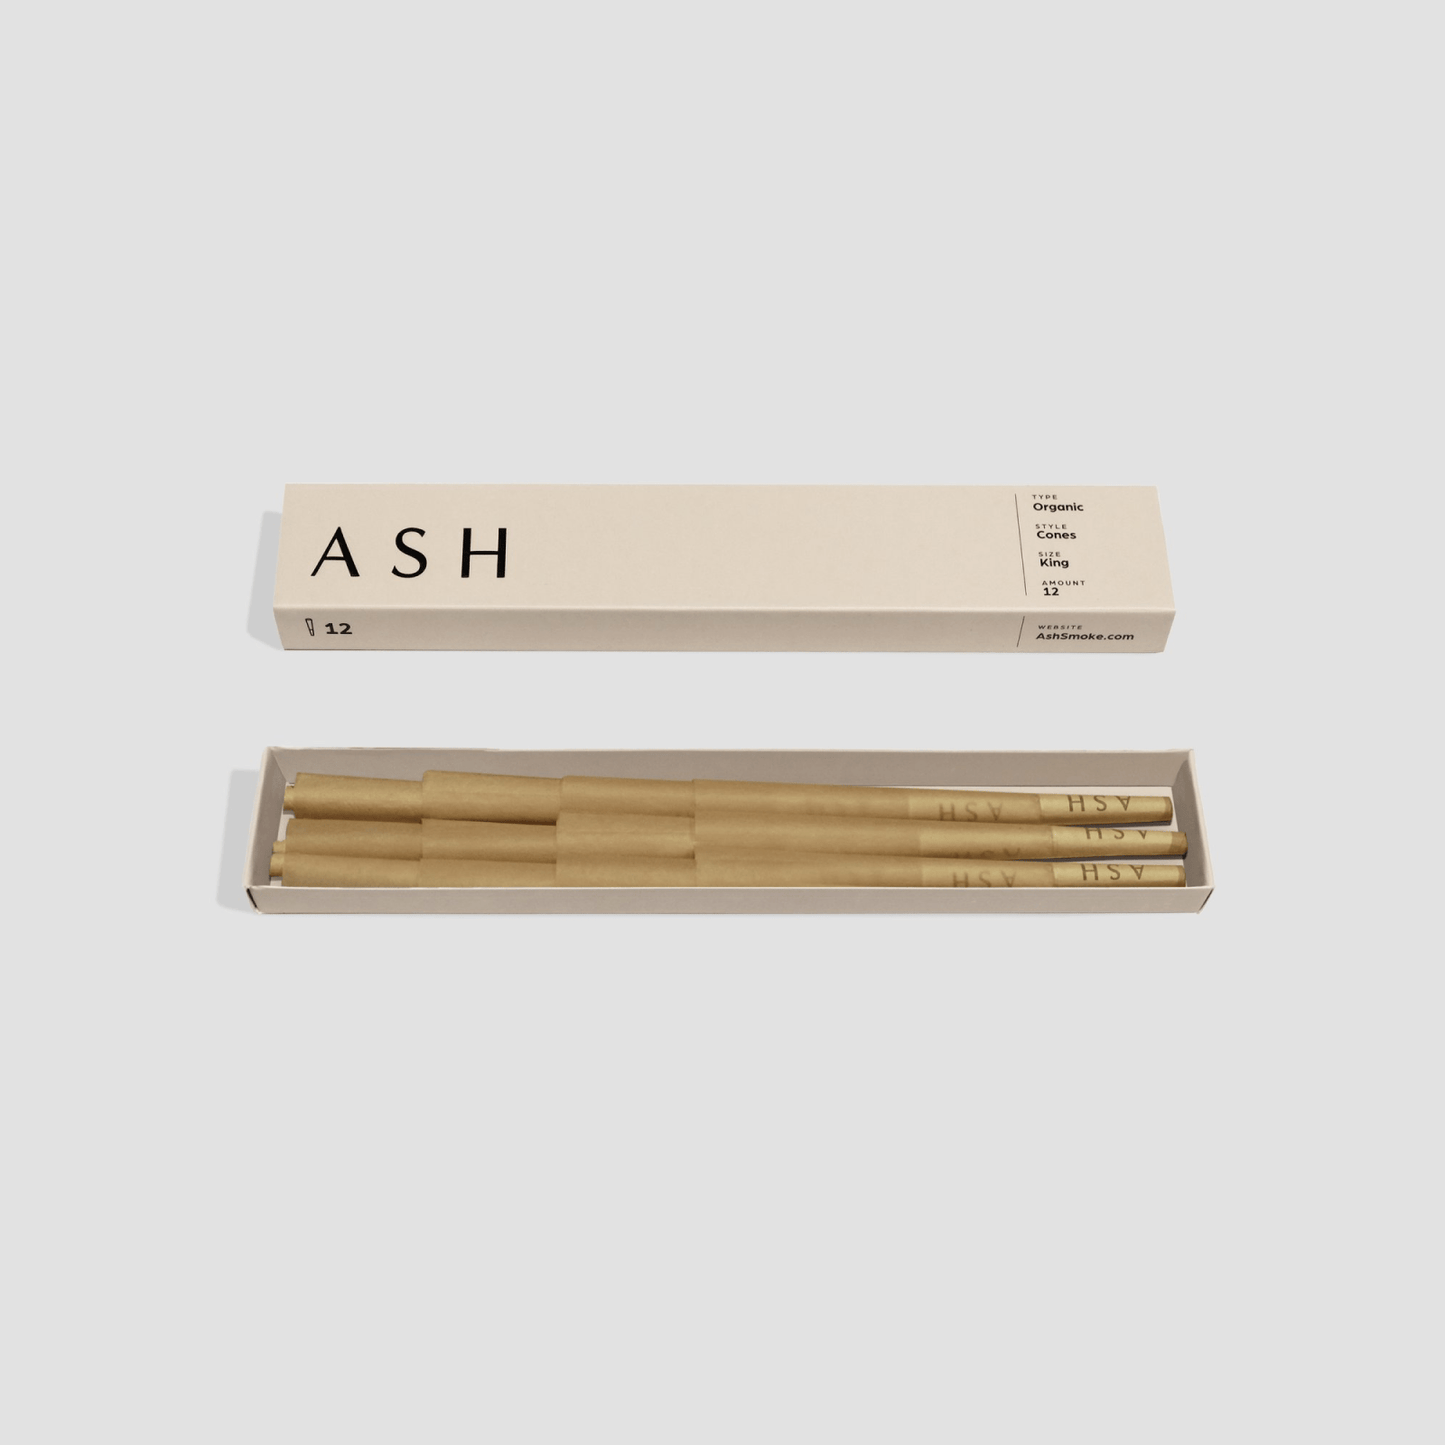 ASH Rolling Paper Pre-rolled Cones | Organic | 12 count